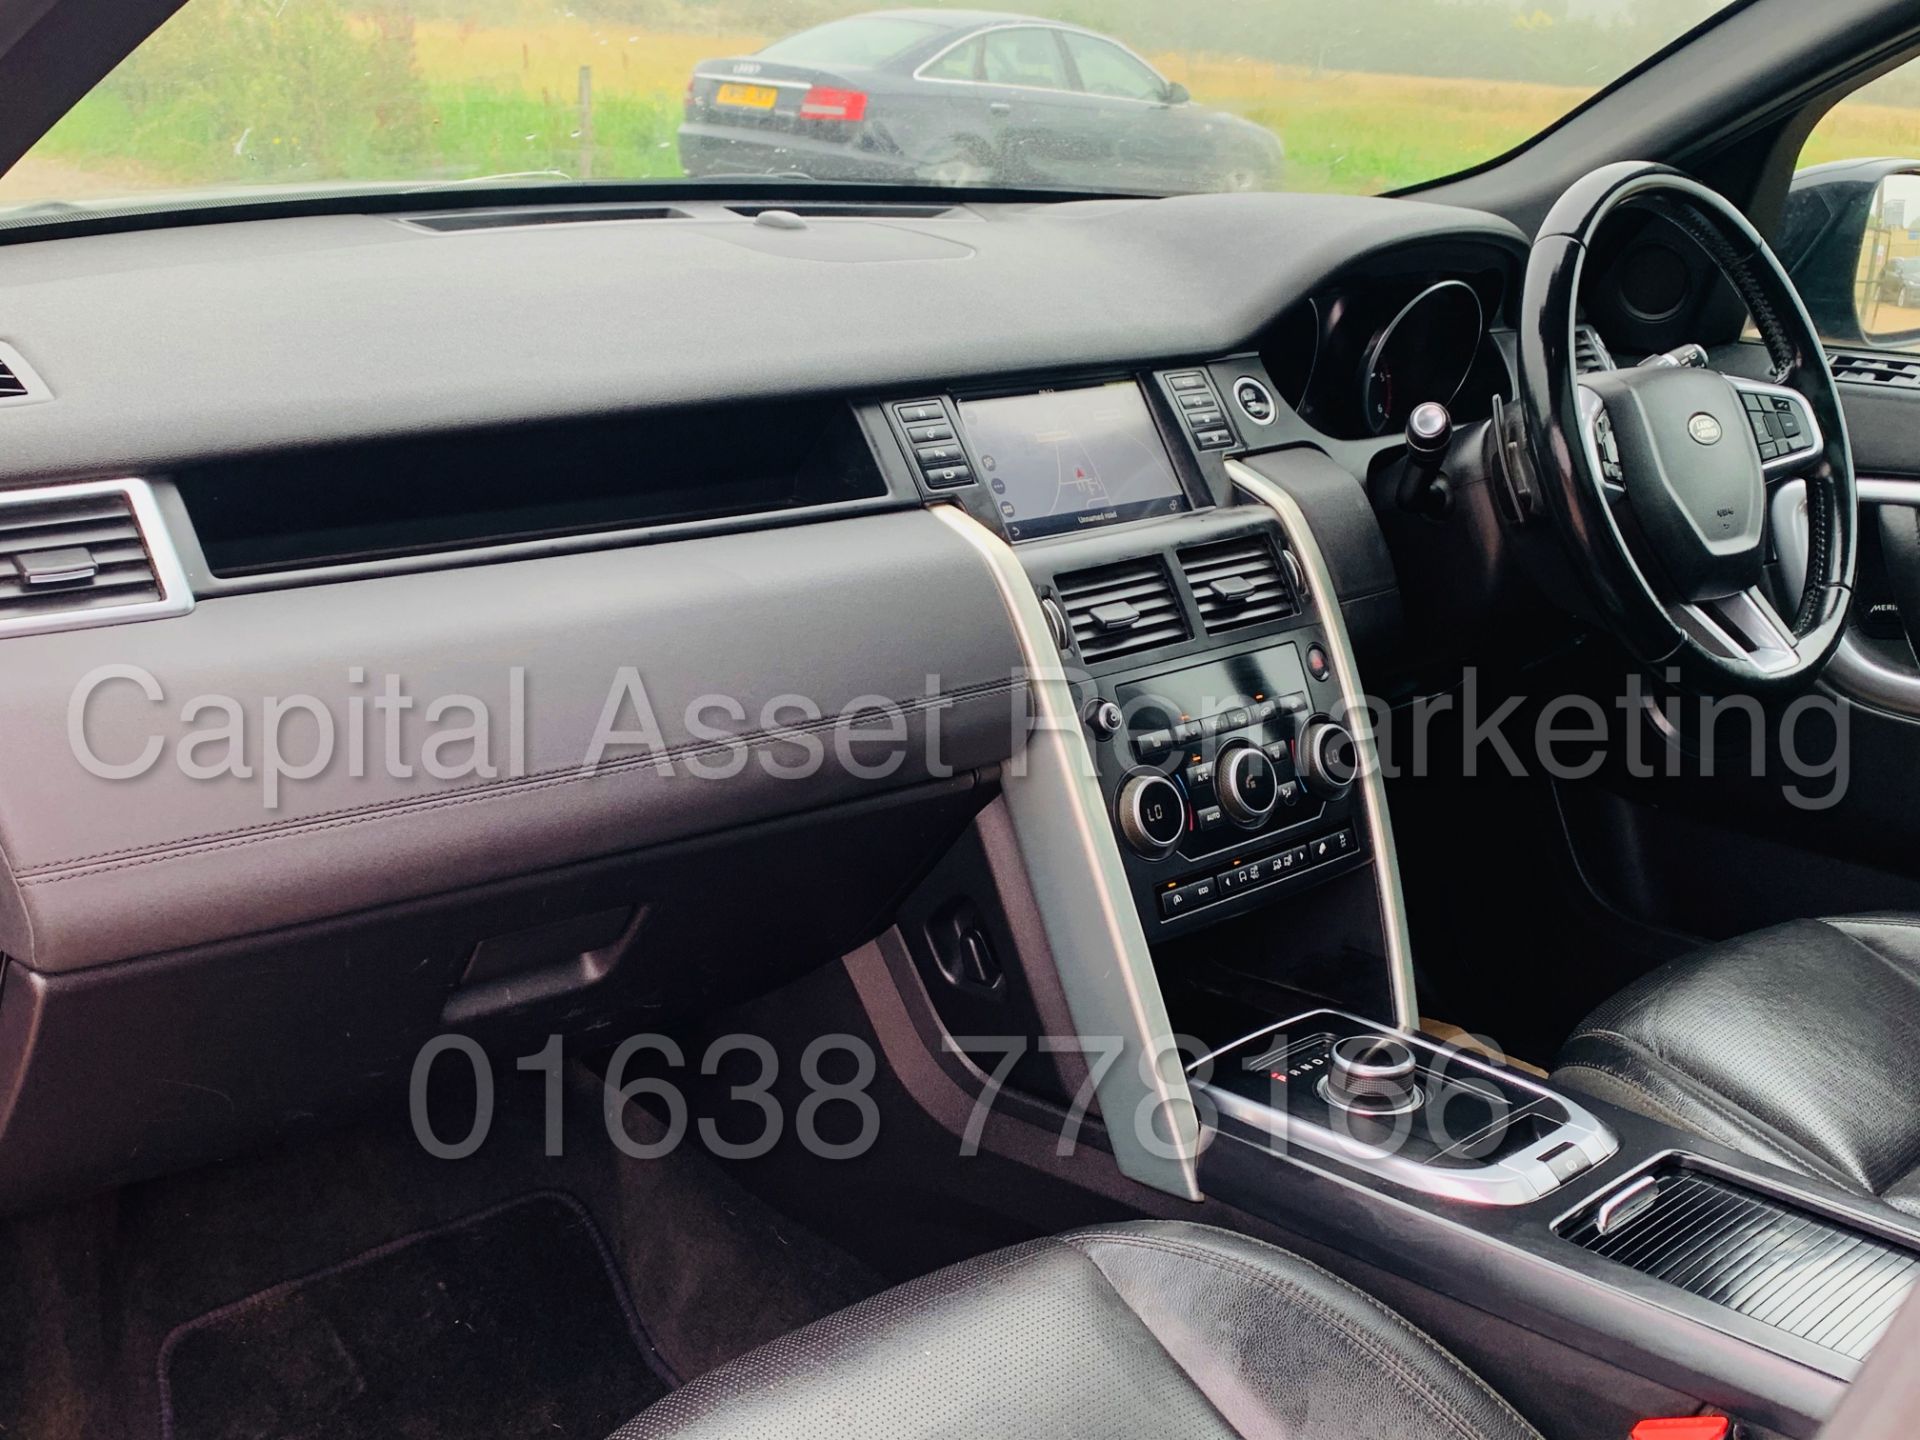 LAND ROVER DISCOVERY SPORT *HSE BLACK EDITION* SUV (2017 MODEL) '2.0 TD4 - AUTO' **MASSIVE SPEC** - Image 23 of 59